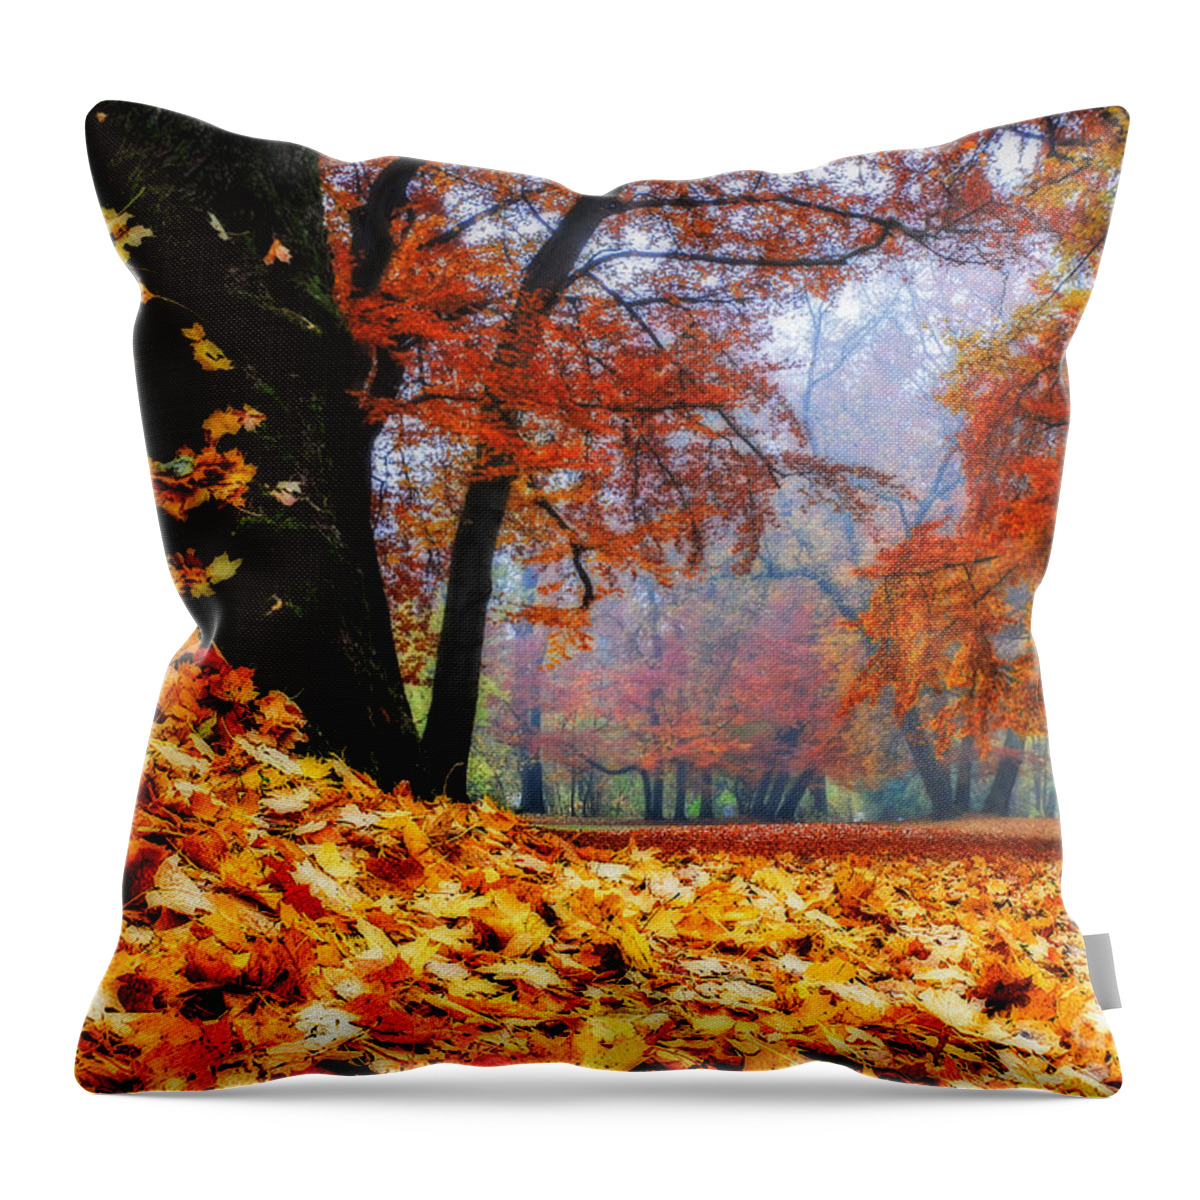 Autumn Throw Pillow featuring the photograph Autumn In The Woodland by Hannes Cmarits